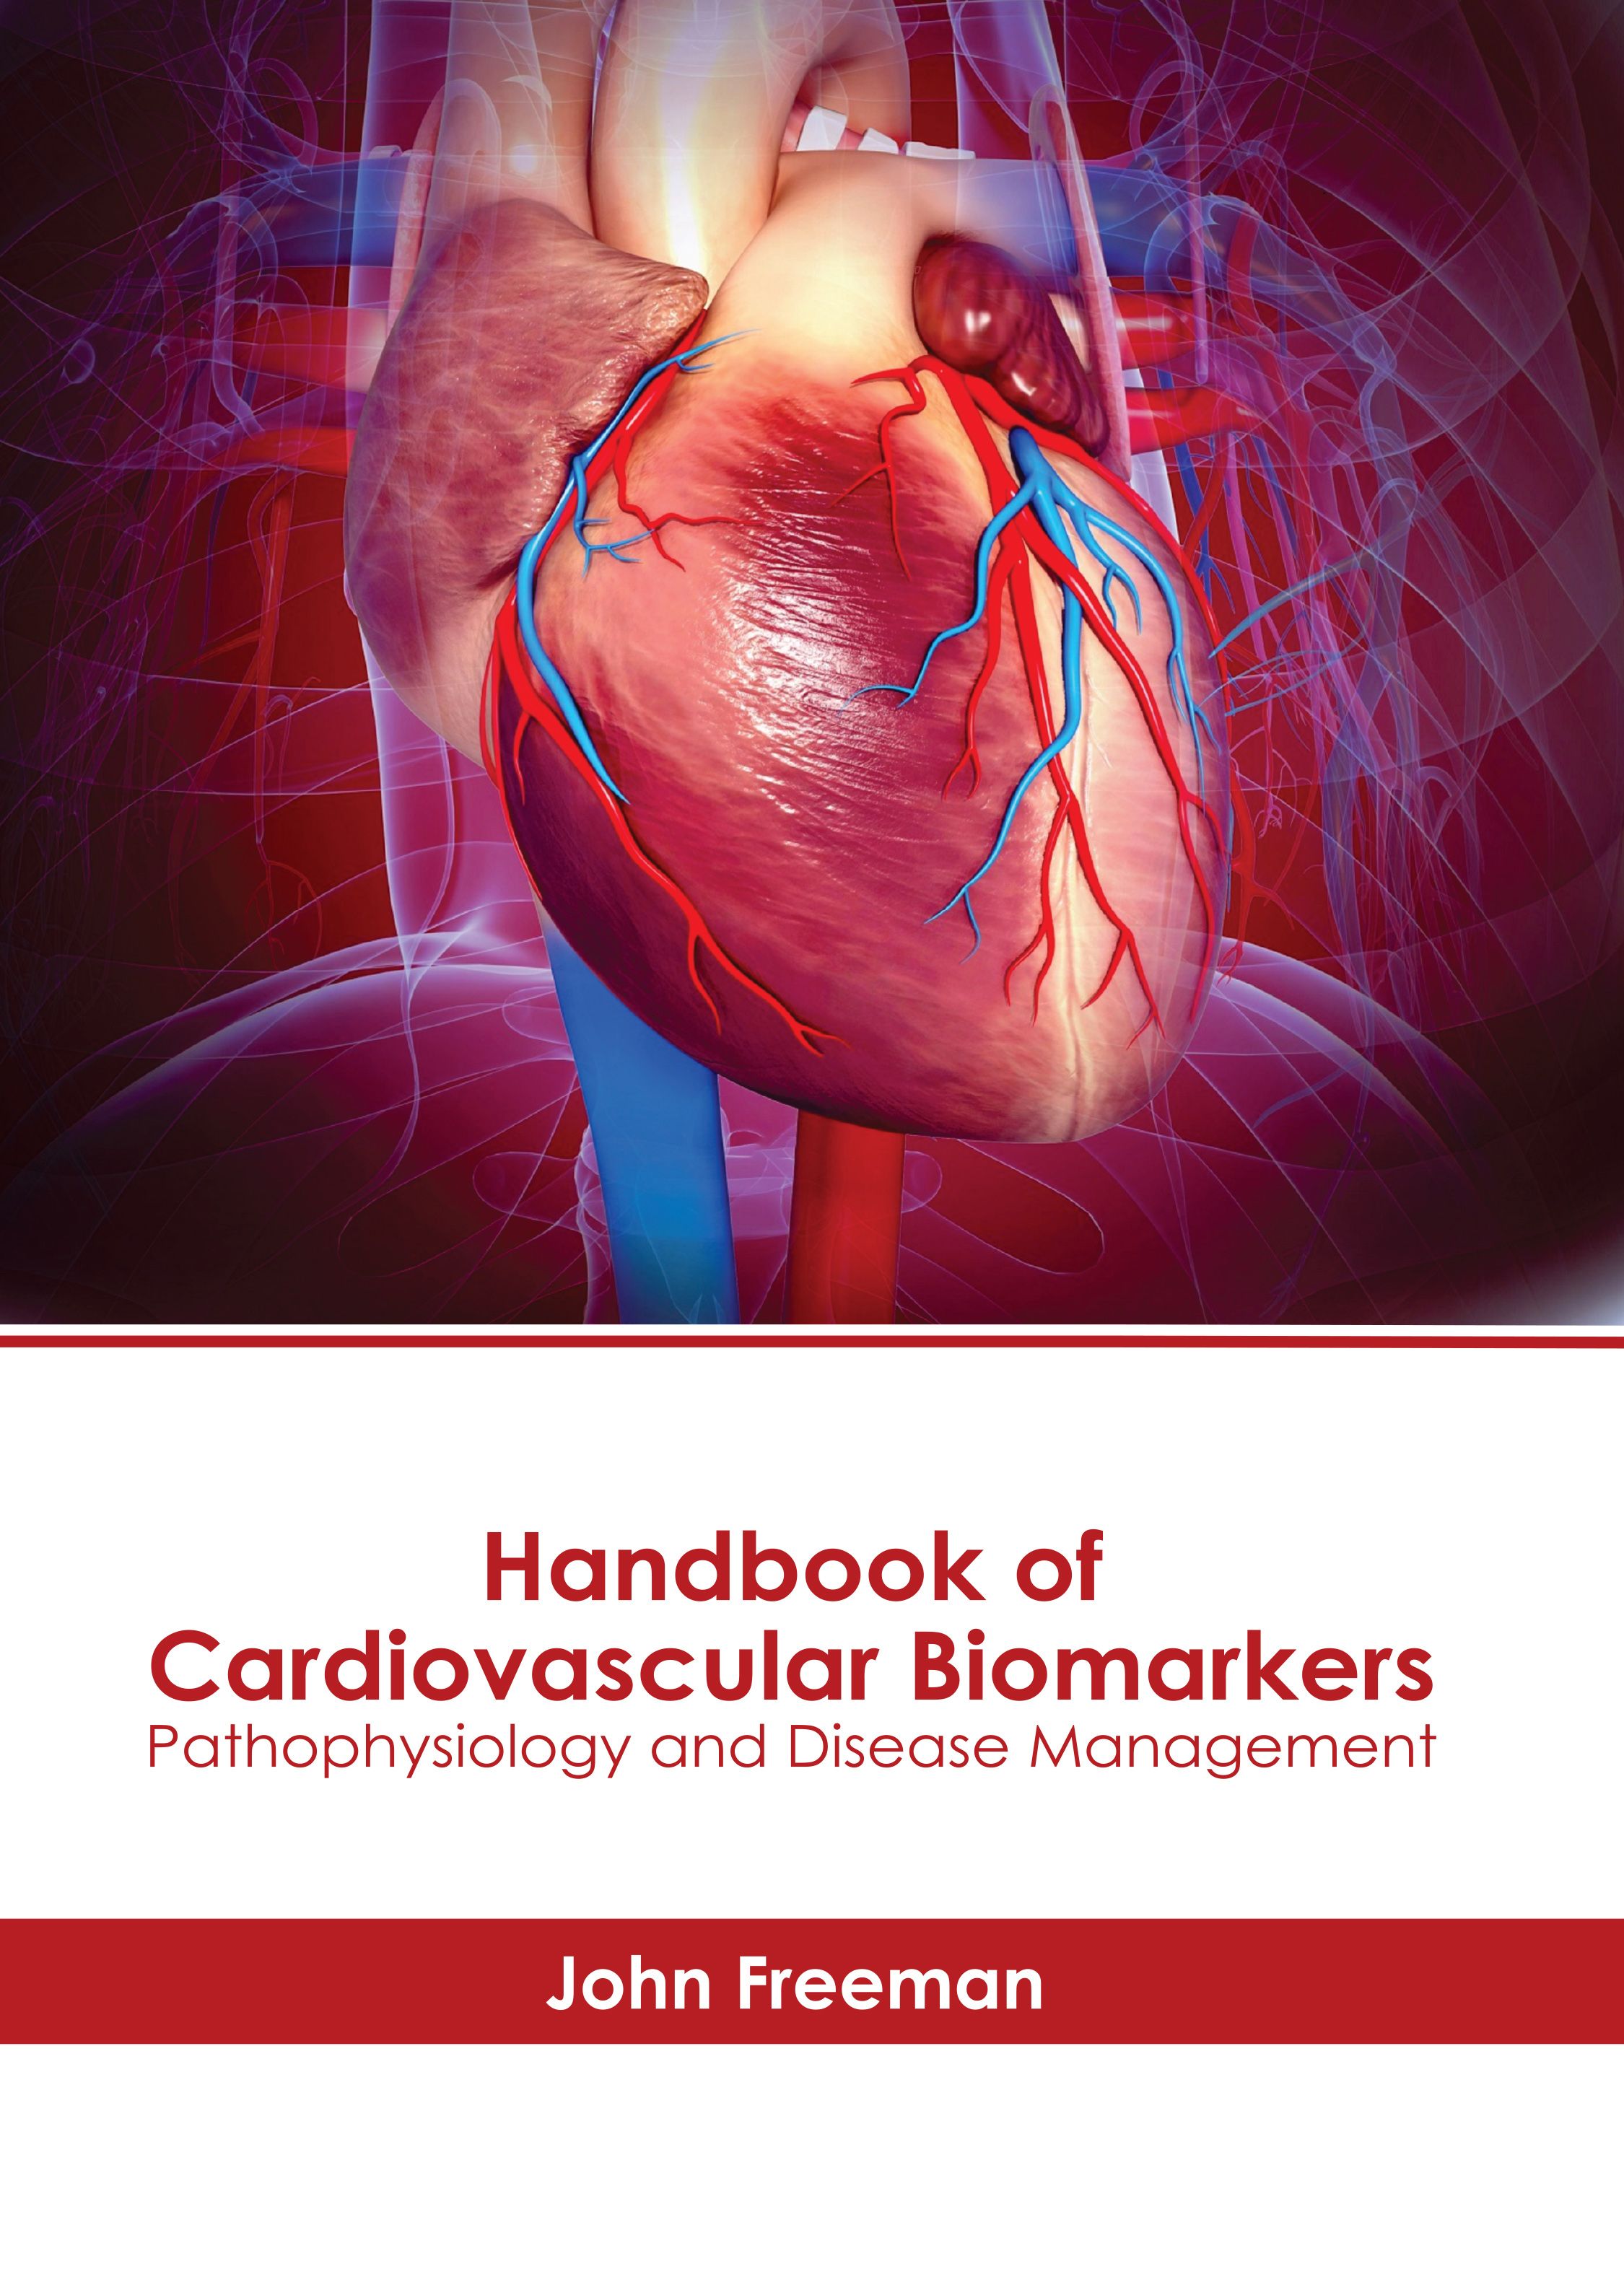 

exclusive-publishers/american-medical-publishers/handbook-of-cardiovascular-biomarkers-pathophysiology-and-disease-management-9781639279616